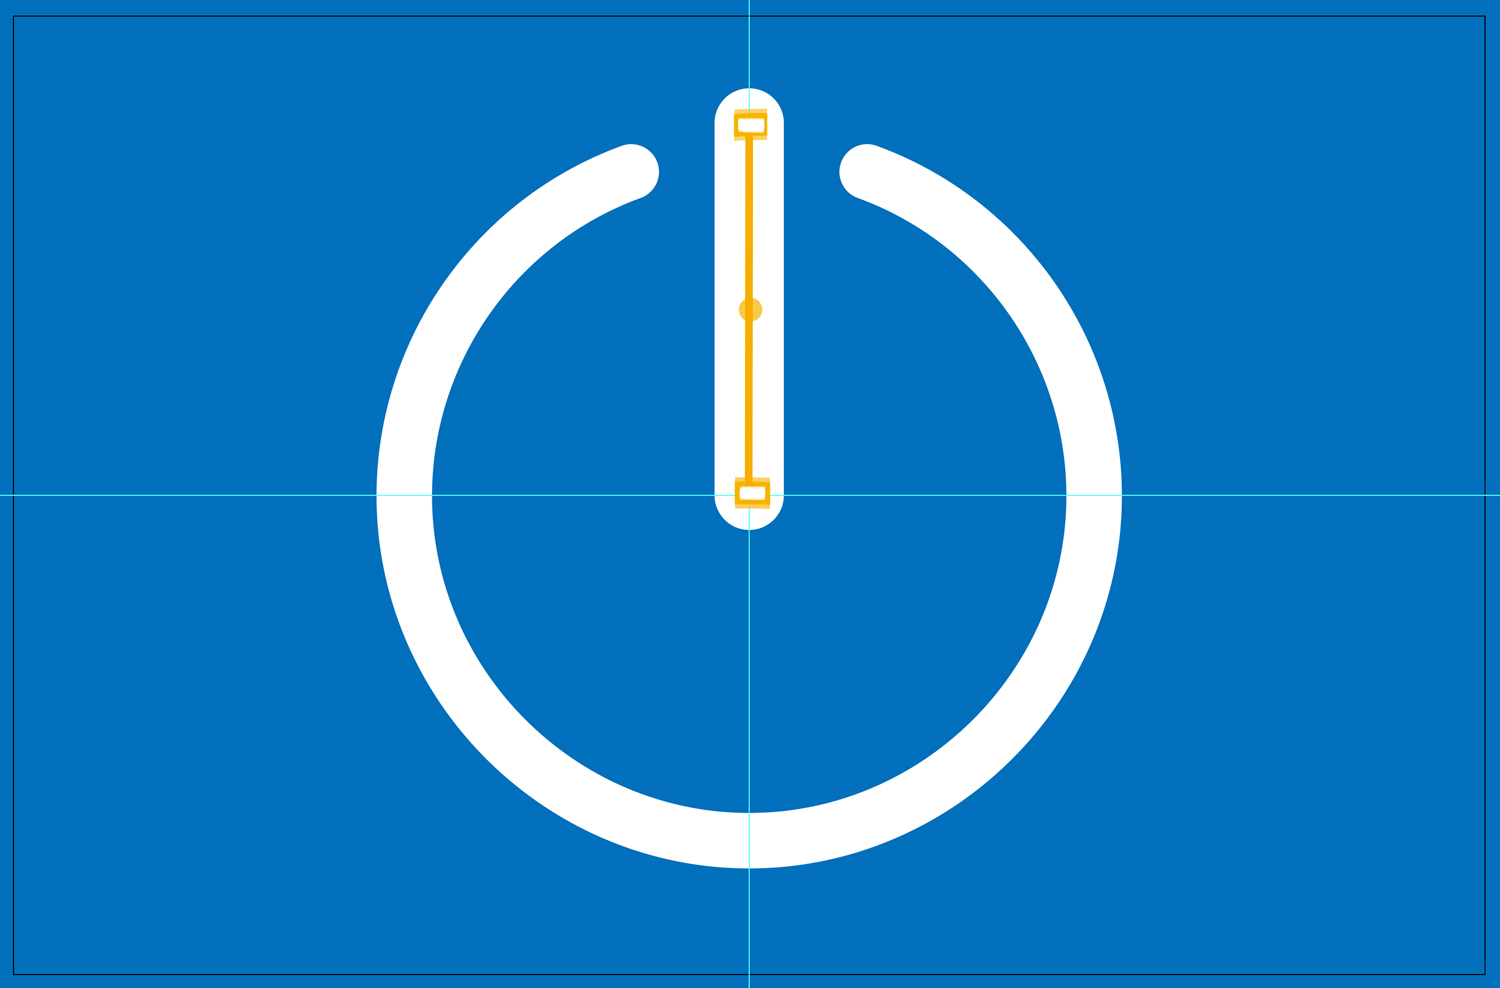 The power symbol in white recreated on a blue background in Illustrator